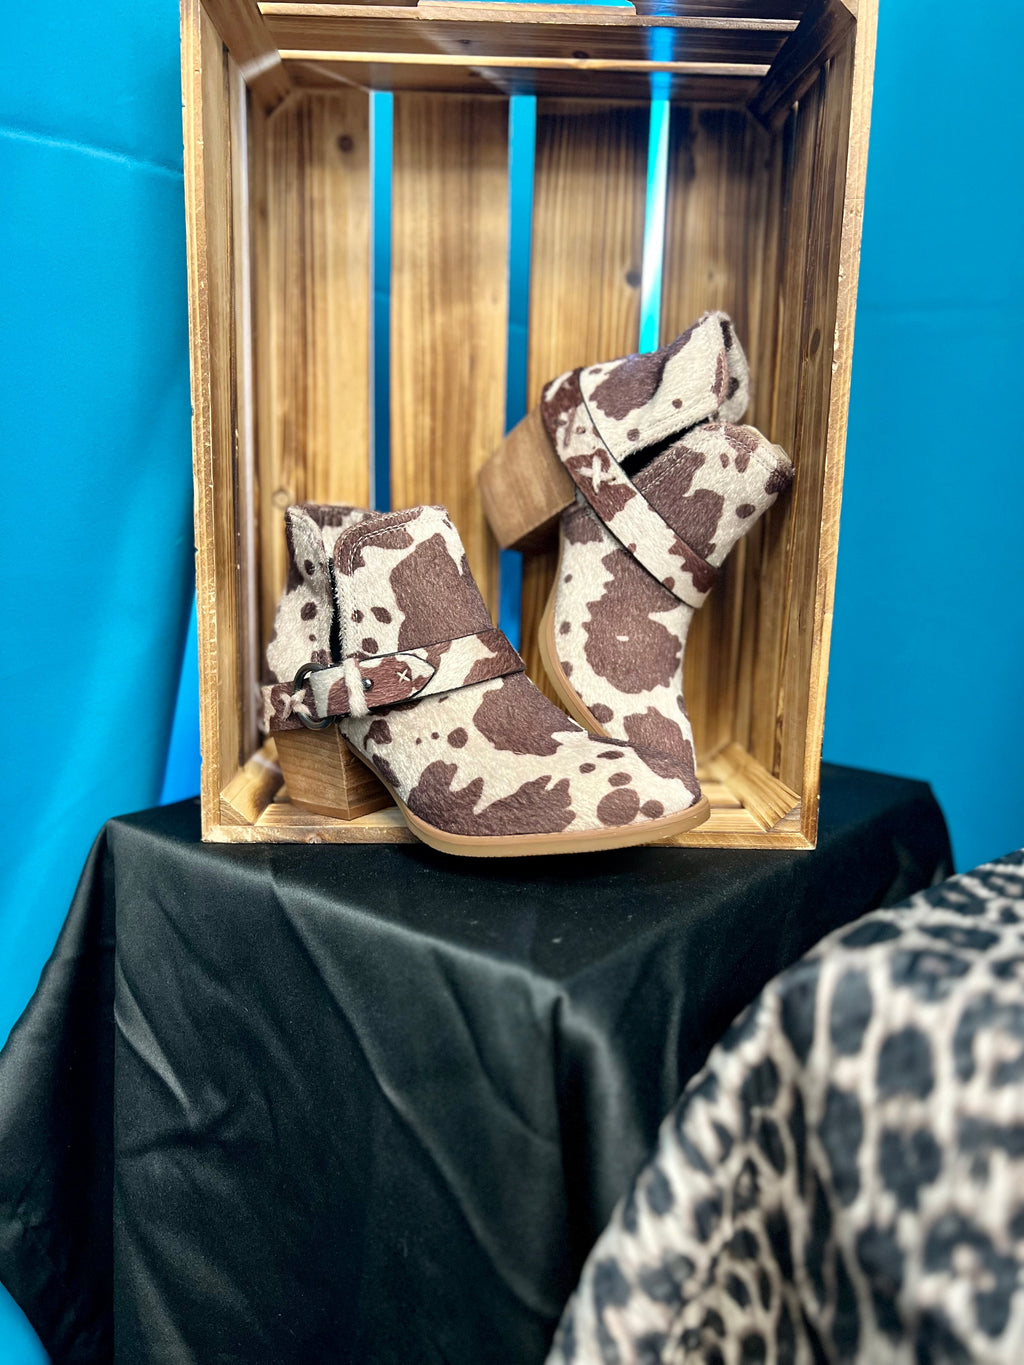 Step up your style game with the Moove Out The Pasture Booties! Featuring a bold cow print faux fur, 2 1/2" wood heel, 6" total height, plus inside and outside ankle slits and a wrap around ankle strap, these booties will take your look to the next level. Show ‘em you mean business!